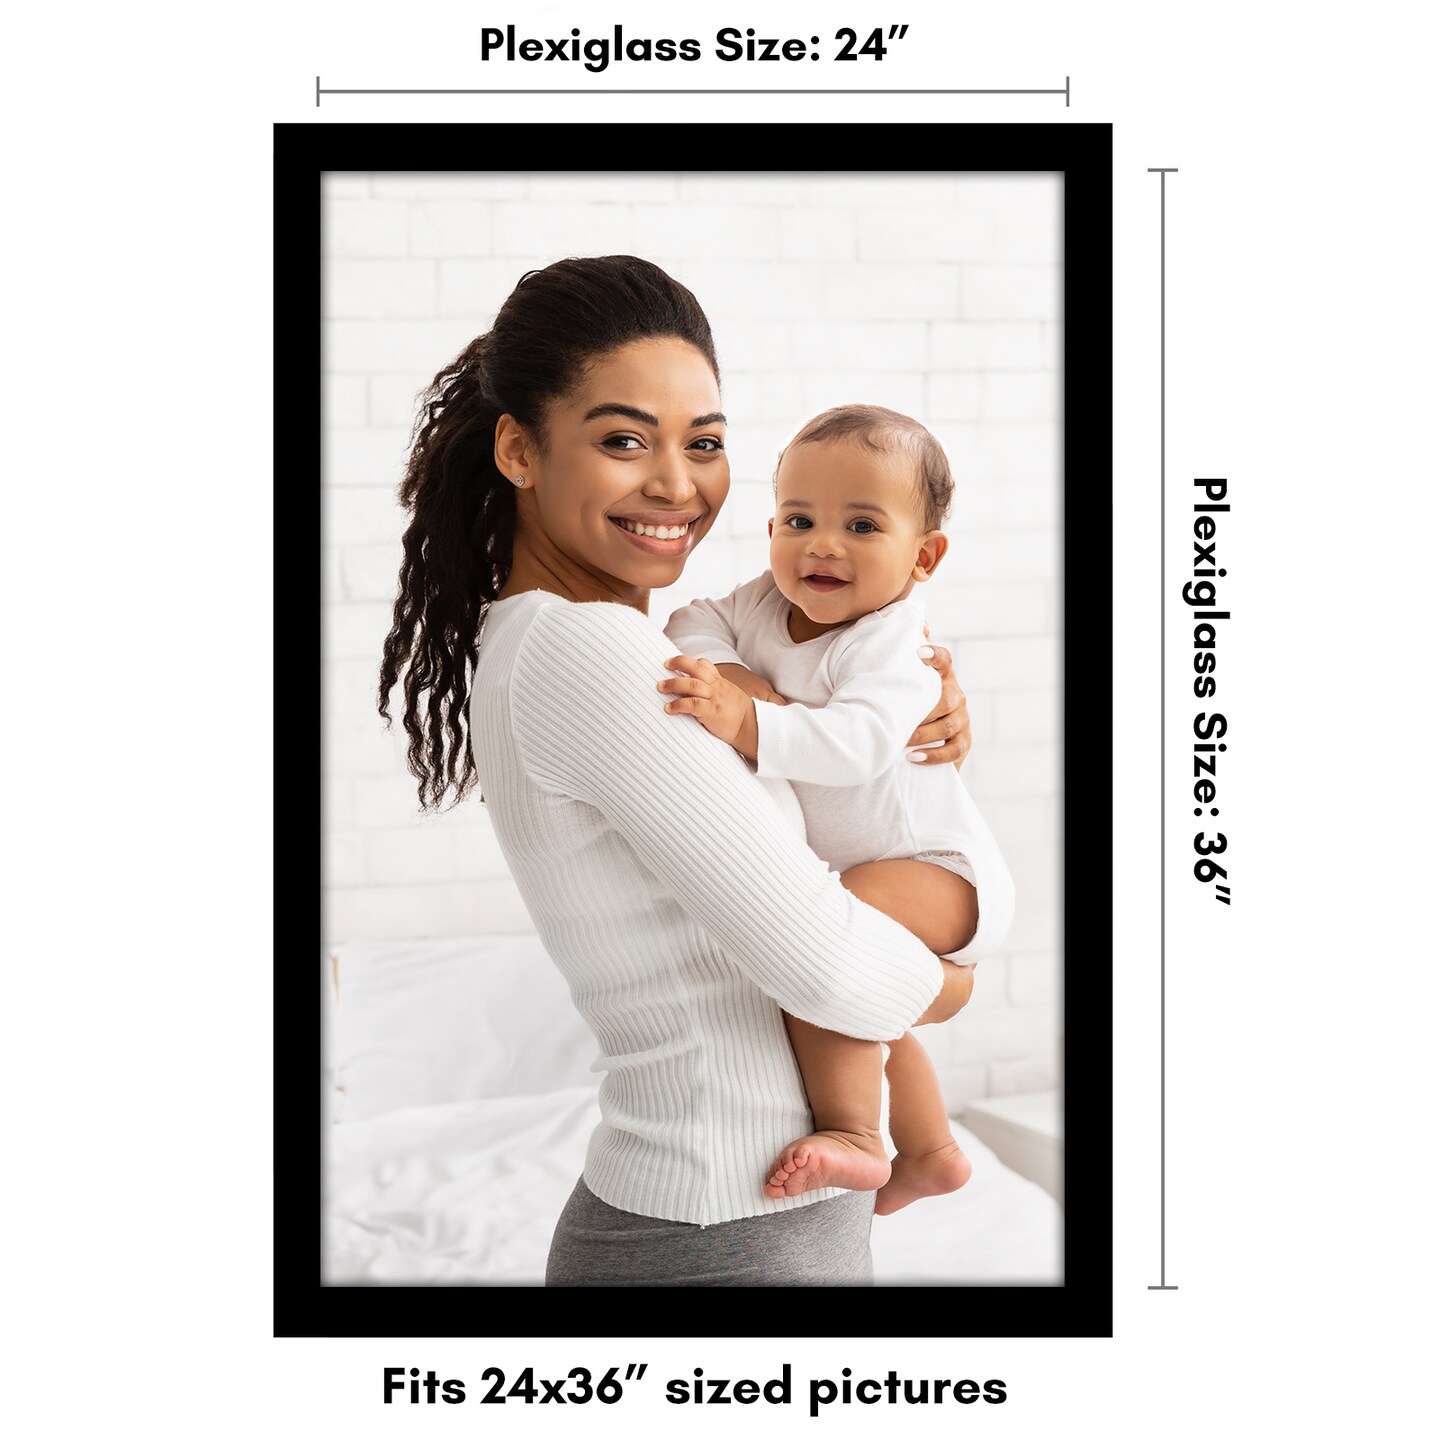 Americanflat Wall Hanging Poster Frame - Picture Frame For Vertical or Horizontal Photo Display